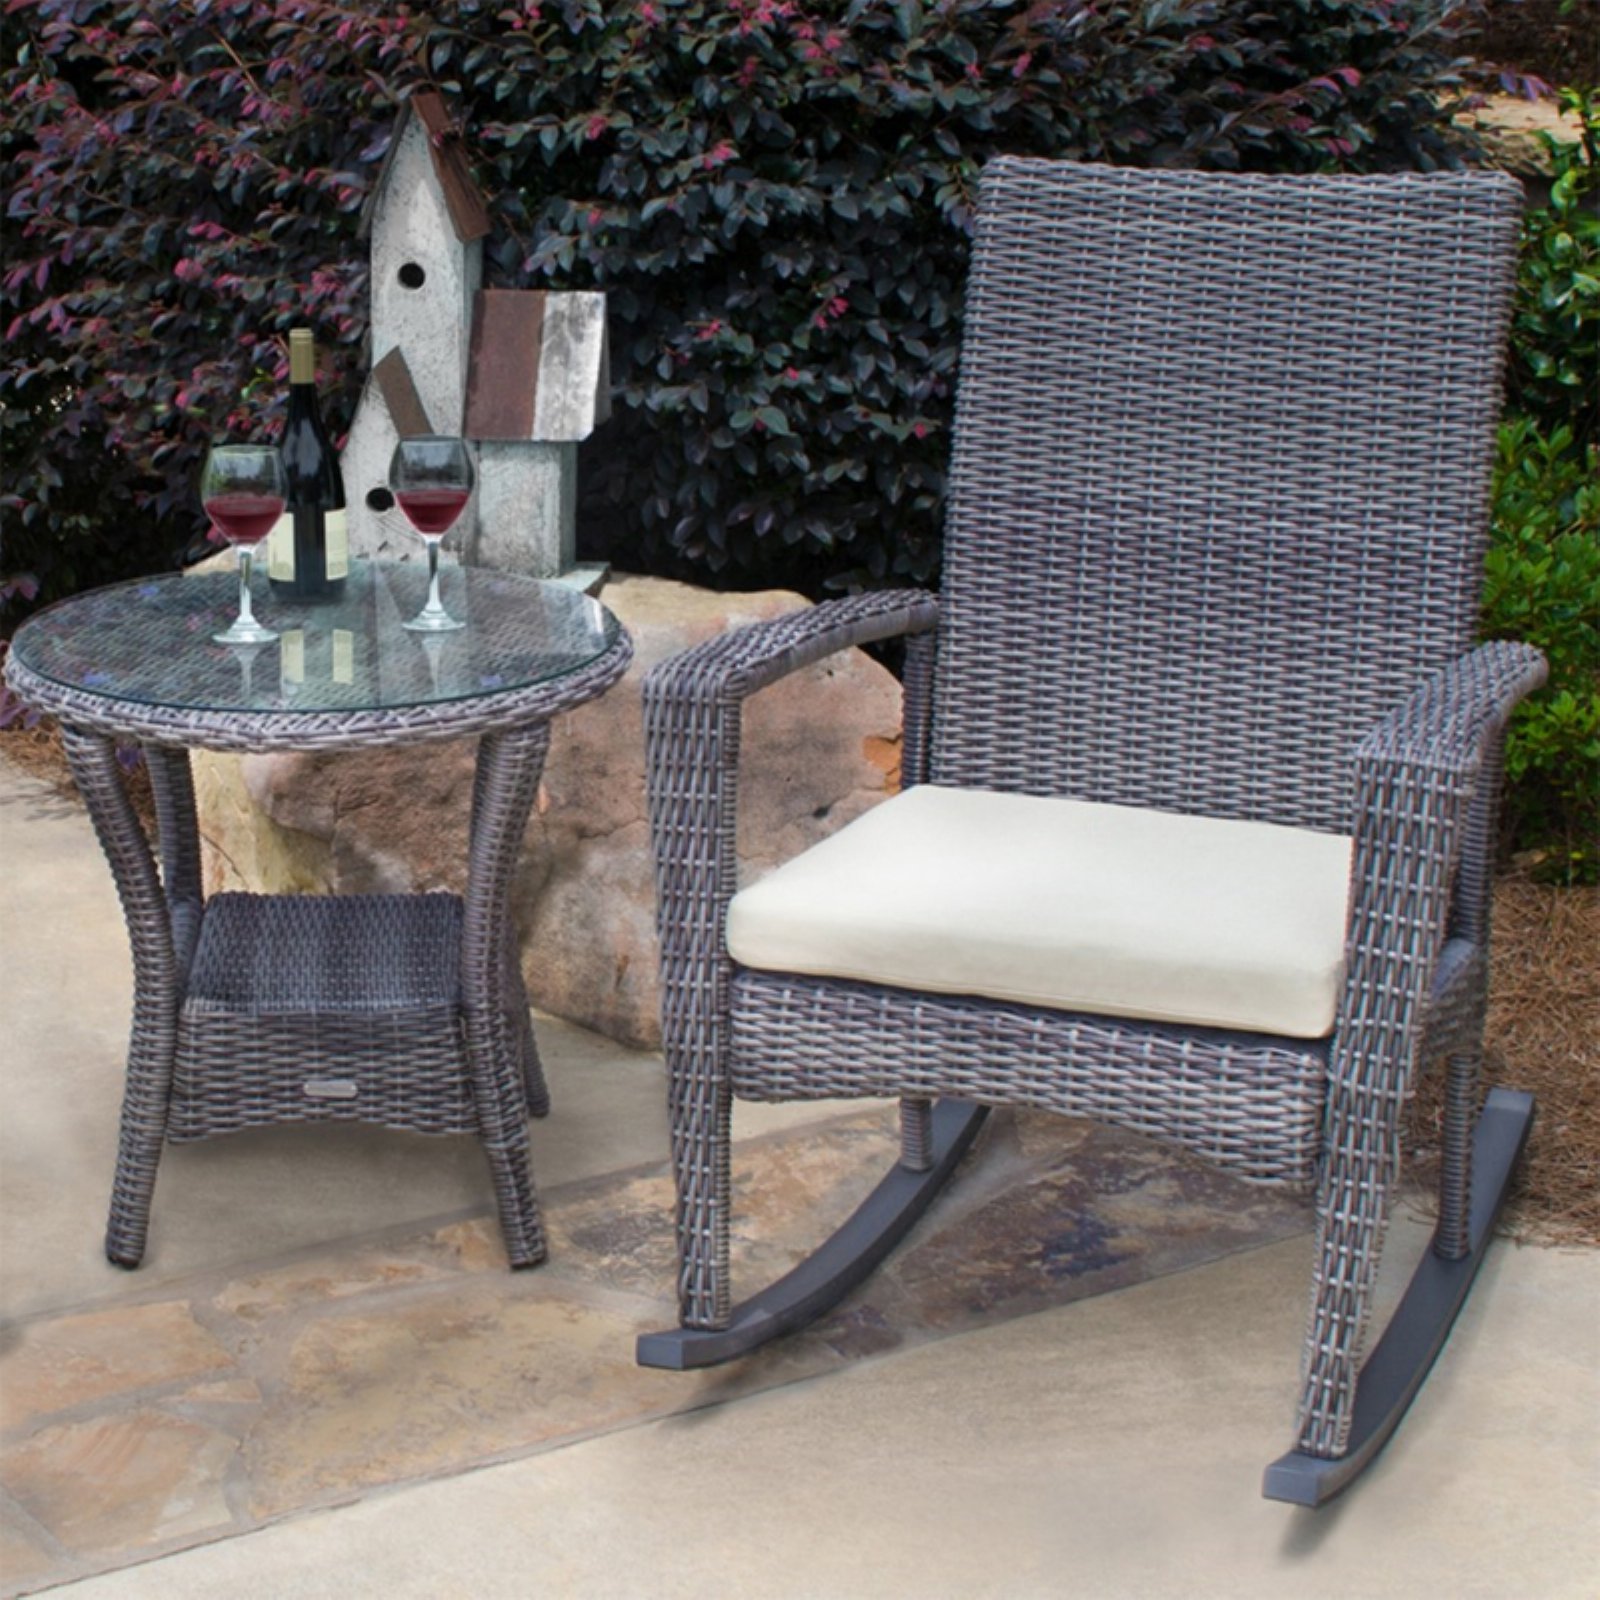 Tortuga Outdoor Bayview Rocking Chair and Side Table - image 1 of 5